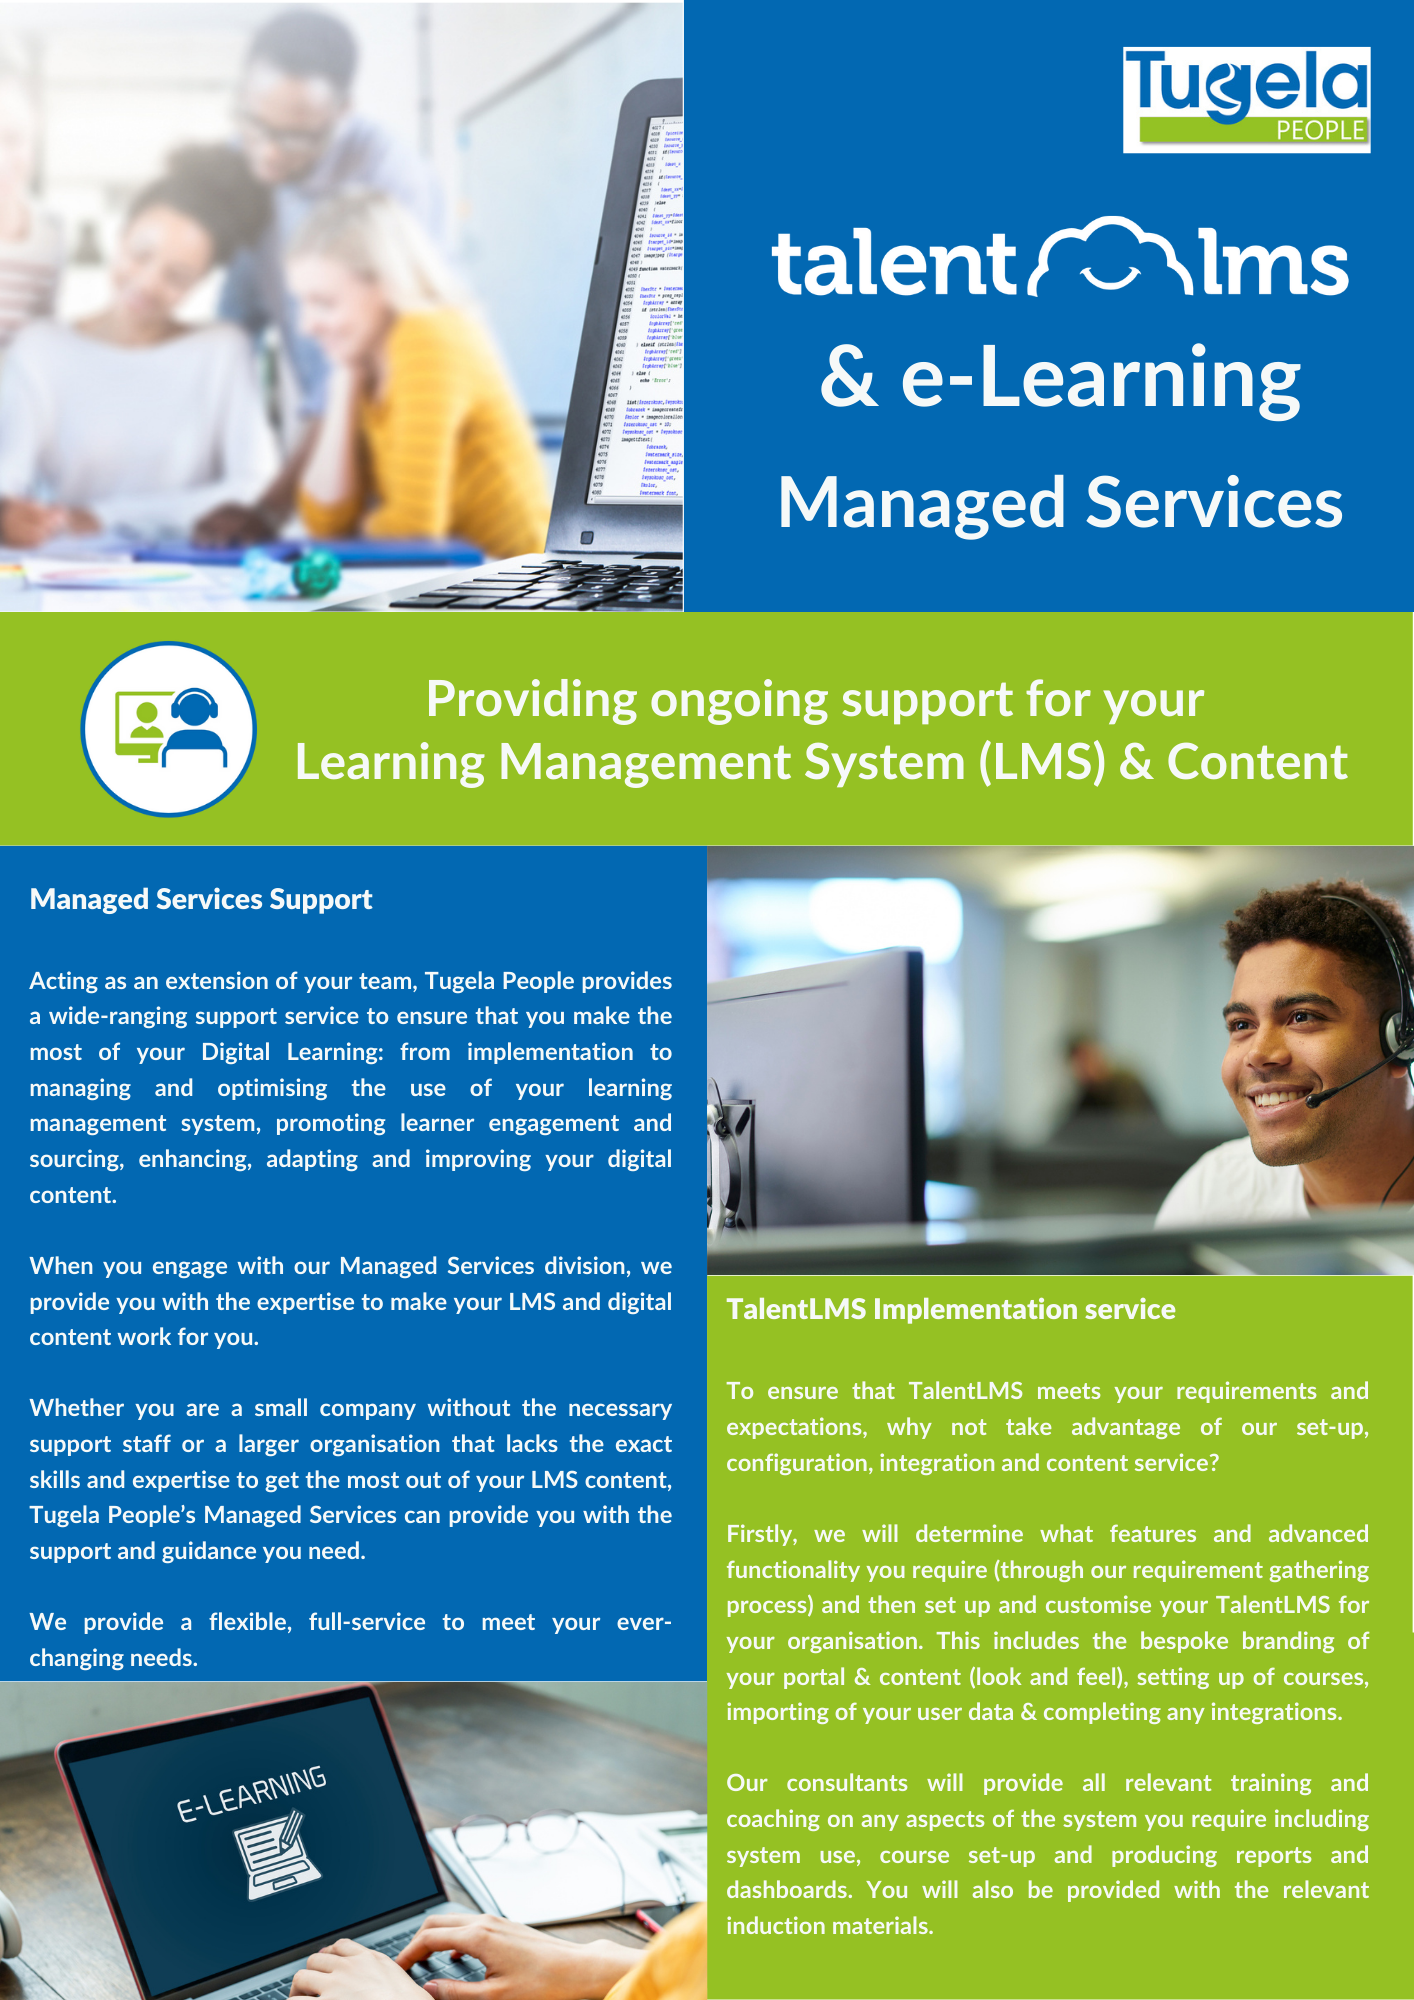 Managed Services for TalentLMS & eLearning